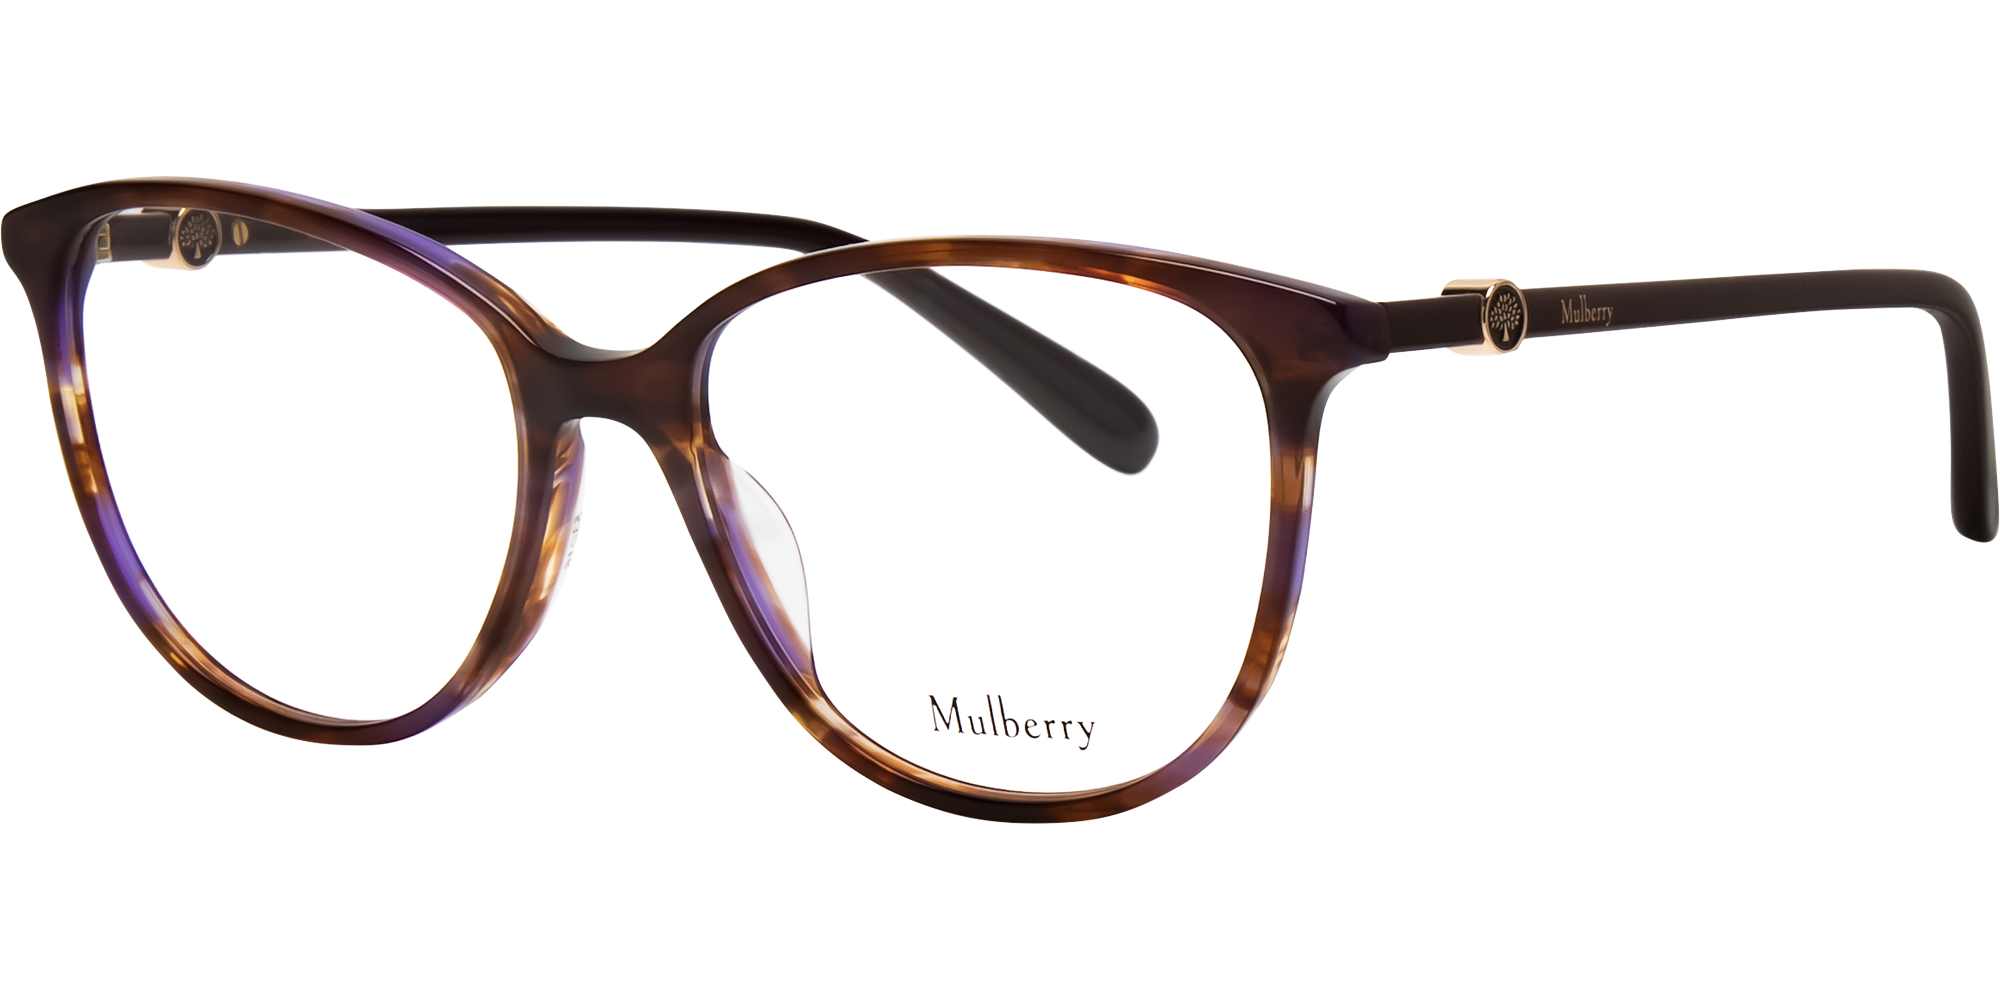 Mulberry VML175 image number null